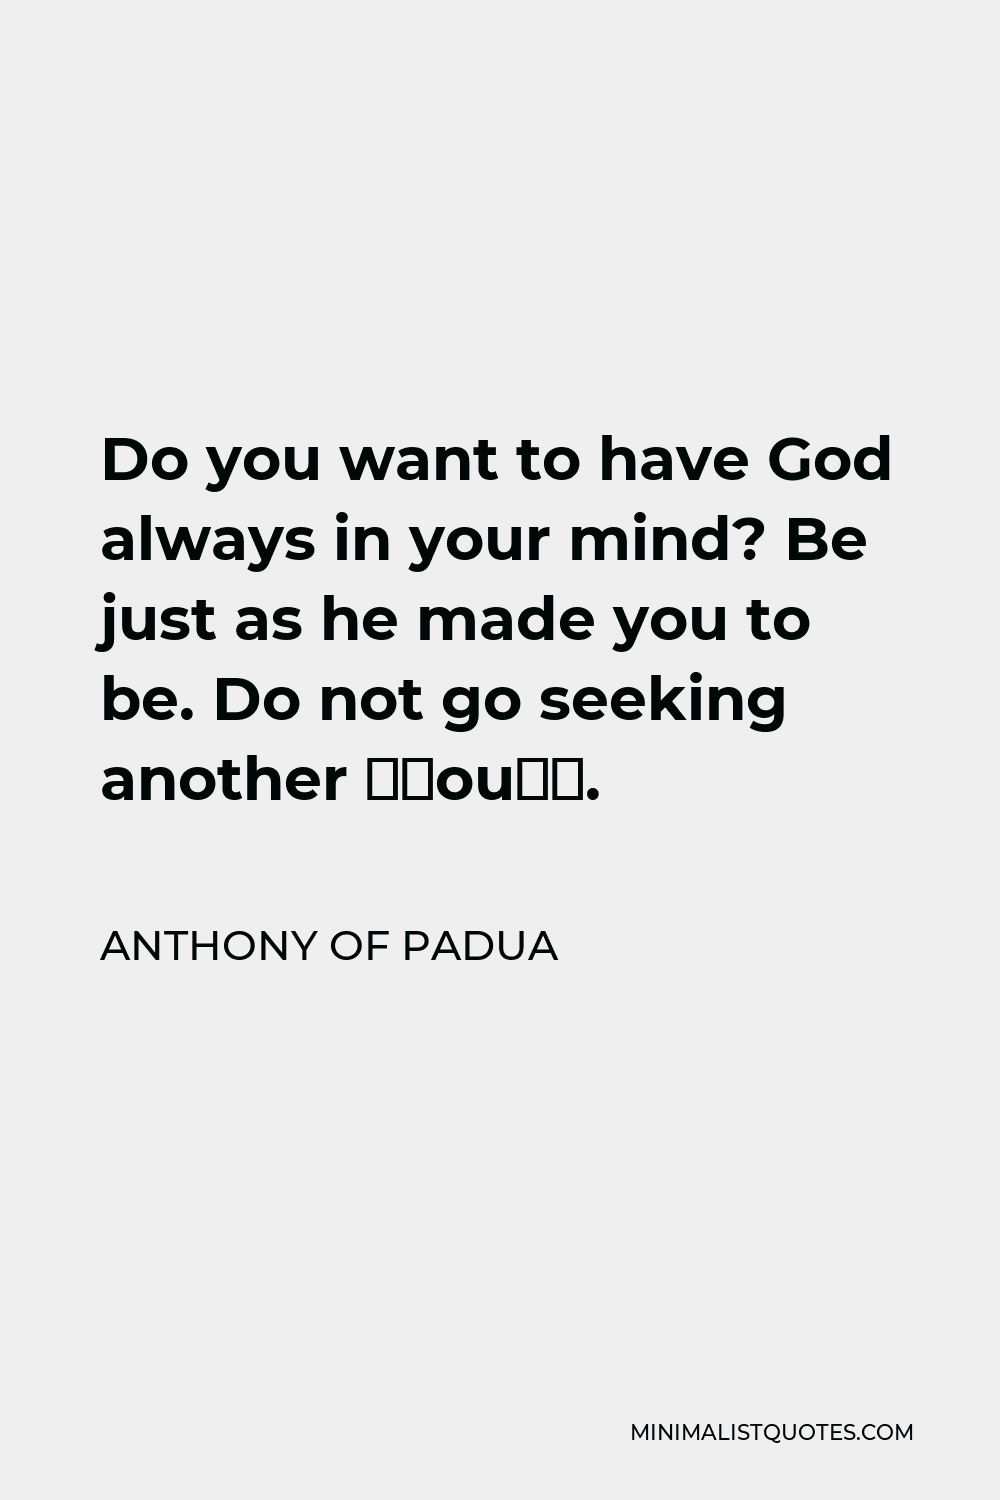 Anthony of Padua Quote - Do you want to have God always in your mind? Be just as he made you to be. Do not go seeking another “you”.